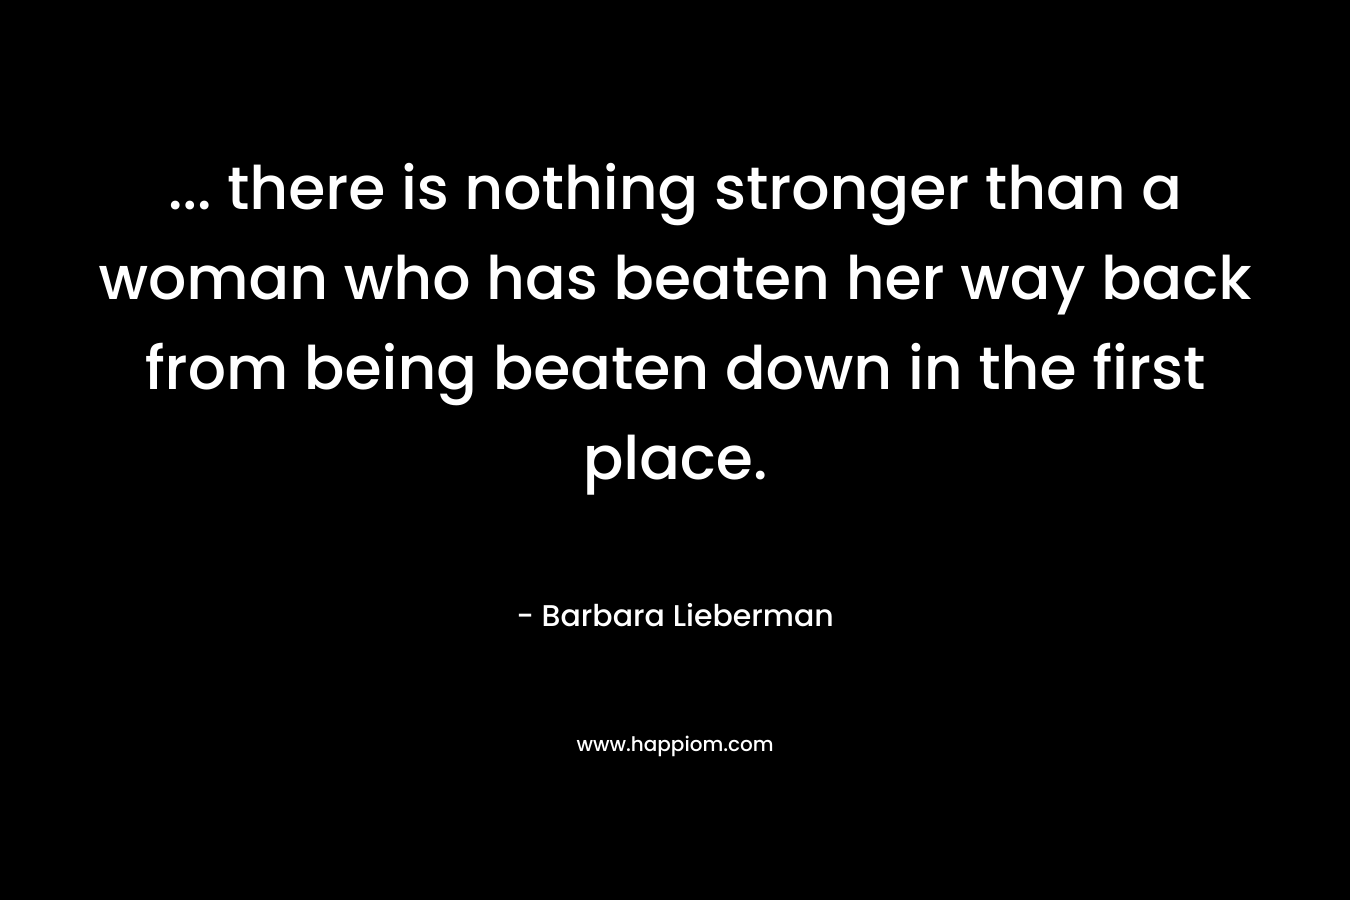 … there is nothing stronger than a woman who has beaten her way back from being beaten down in the first place. – Barbara Lieberman